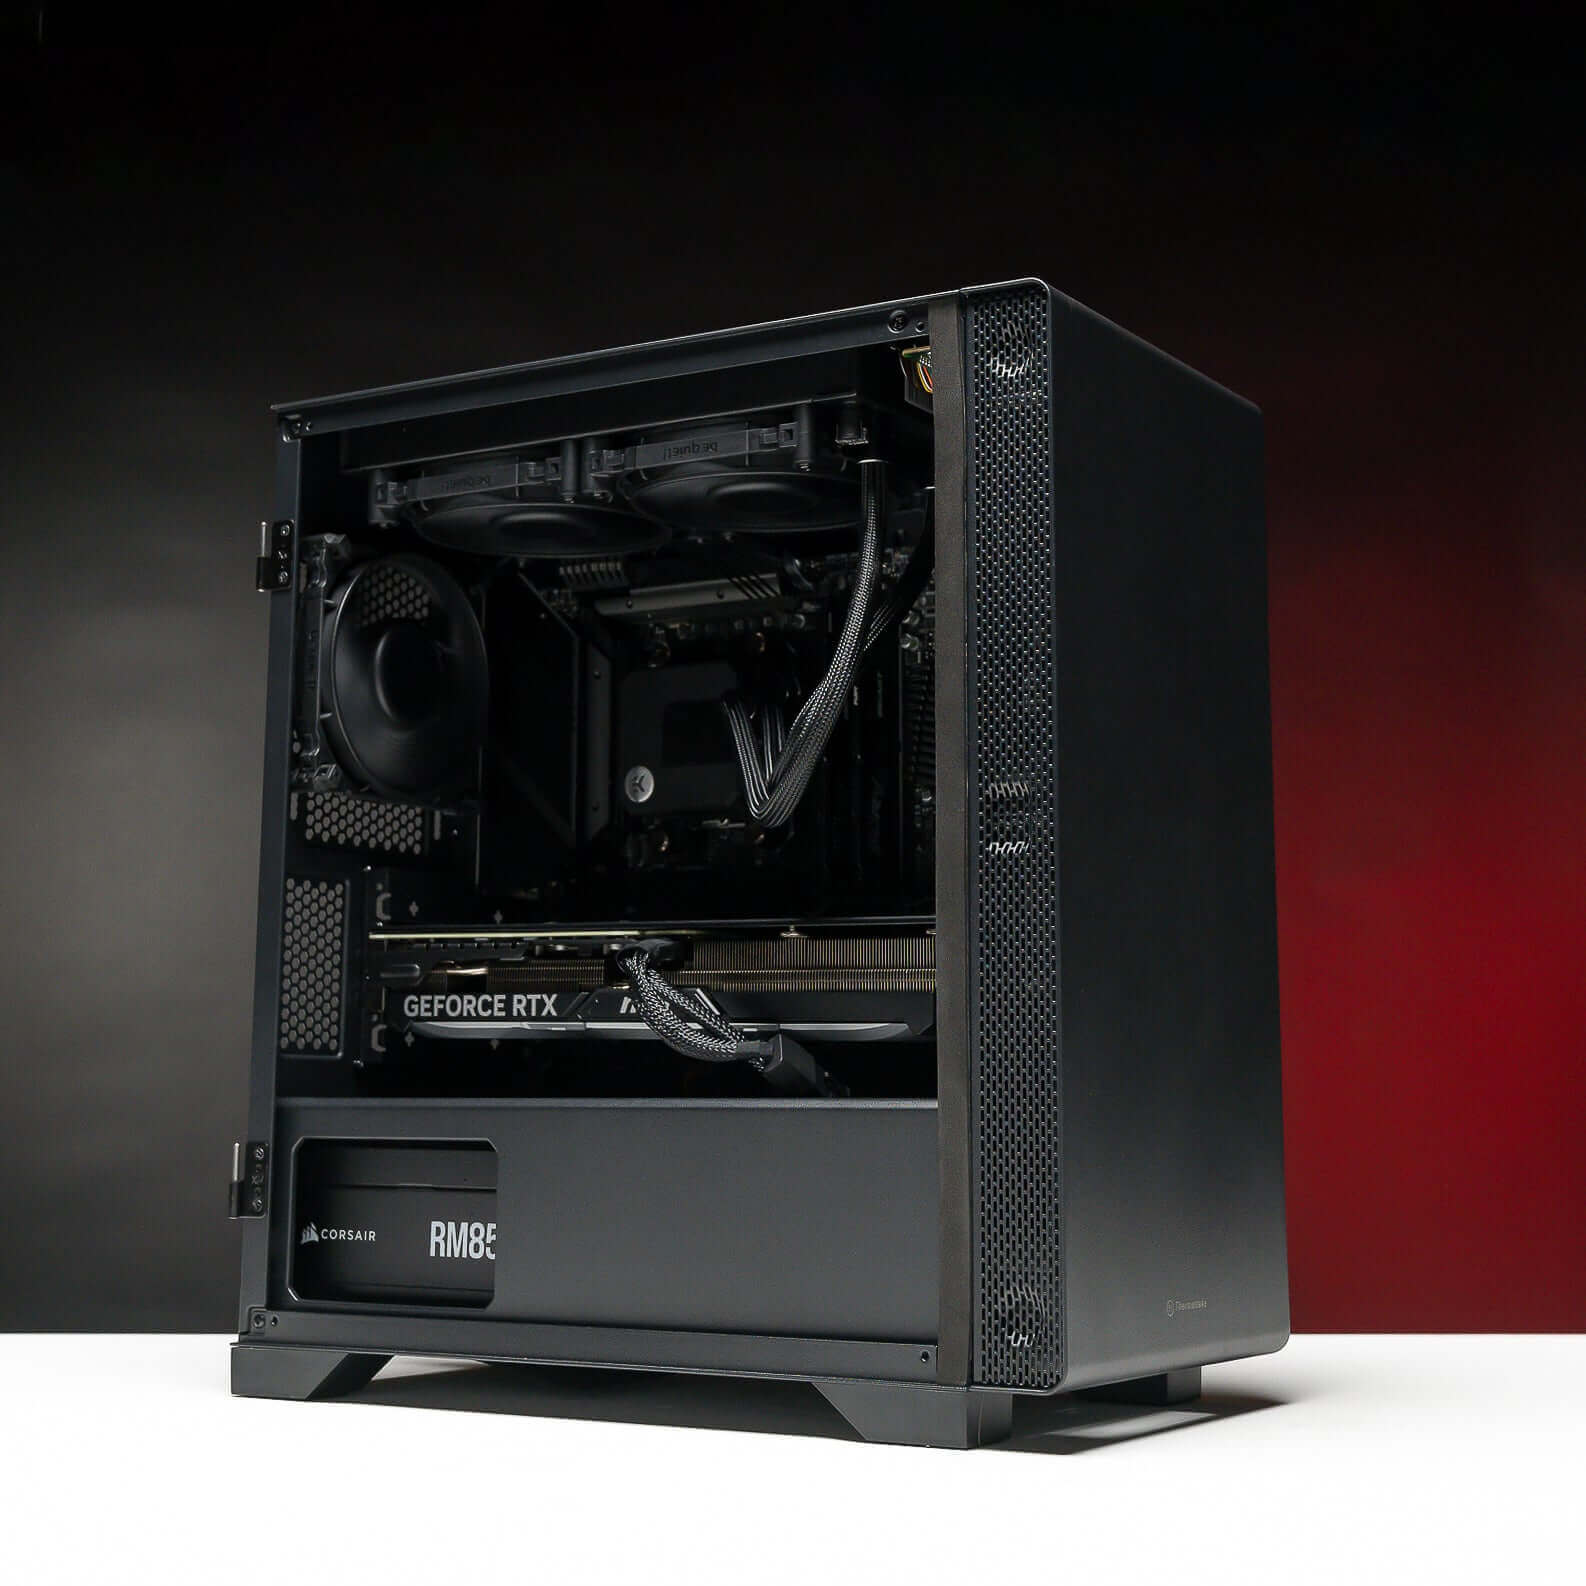 Side view of the sleek ECLIPSE Gaming PC showcasing the EKWB EK-AIO Basic All-In-One 240mm Liquid cooler and Corsair RM850e 850W 80+ Gold power supply